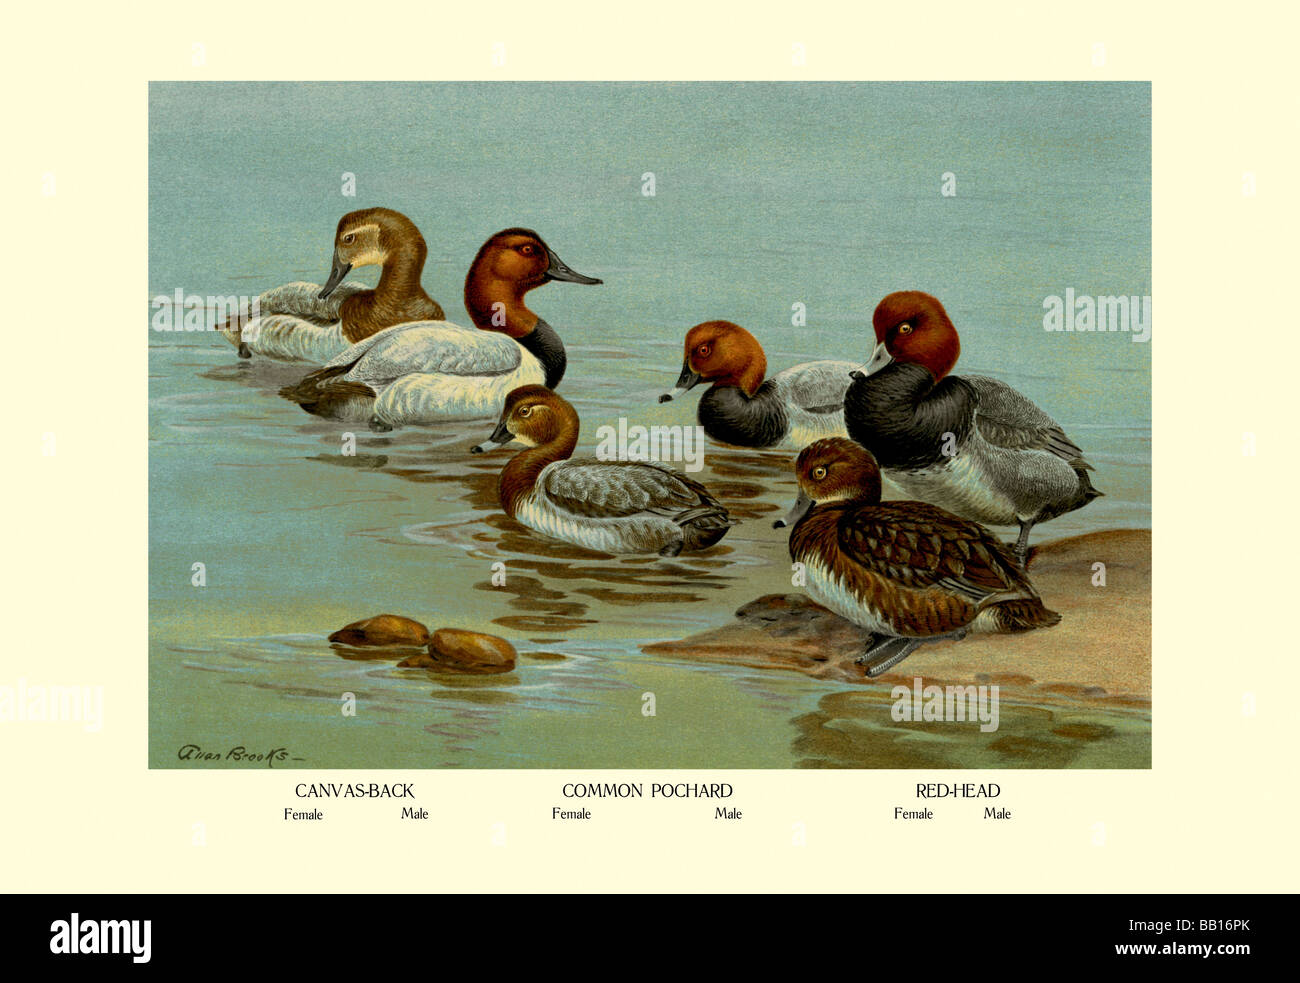 Canvas-Back,Common Pochard and Red-Head Ducks Stock Photo